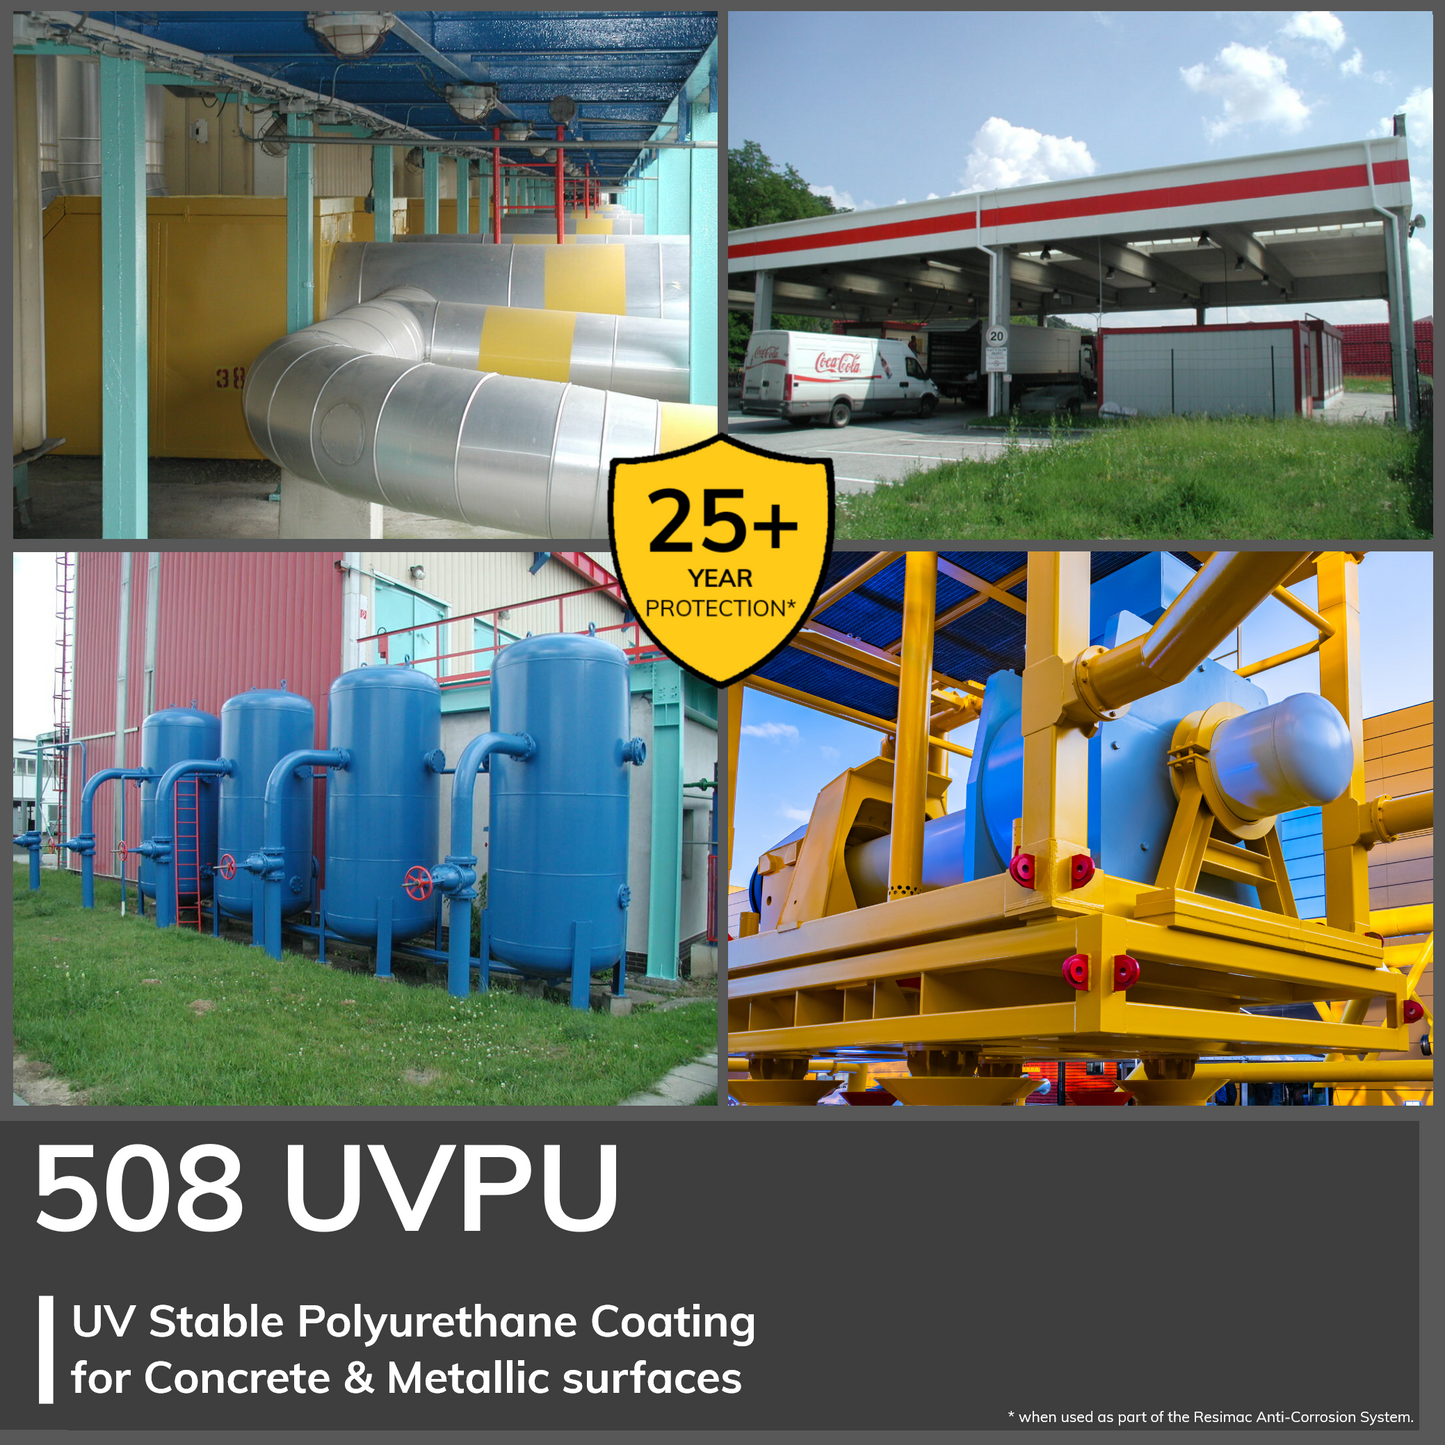 Resichem 508 UVPU | UV stable Polyurethane Coating for Long Term Protection of Steel and Concrete against Corrosion, UV Degradation and Weathering.